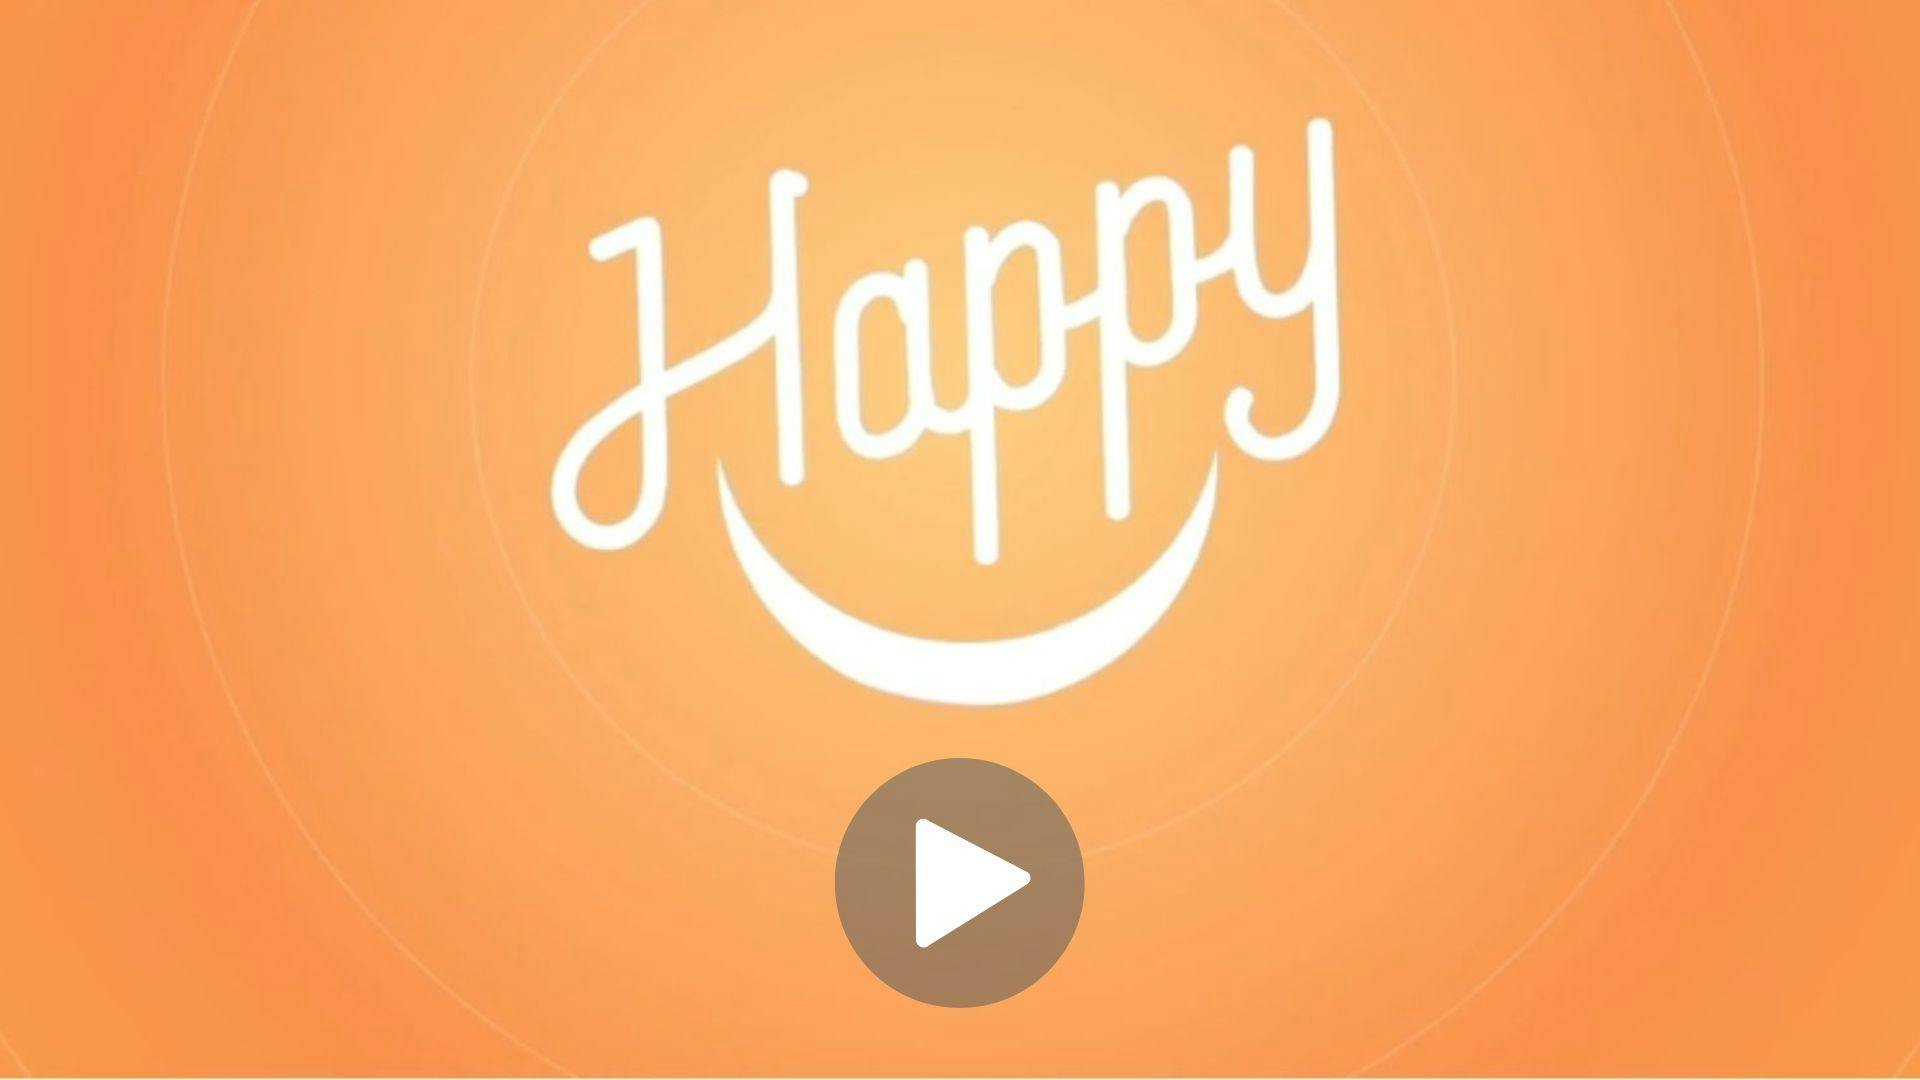 'Welcome To Happy' Video: Transform Your Team Today